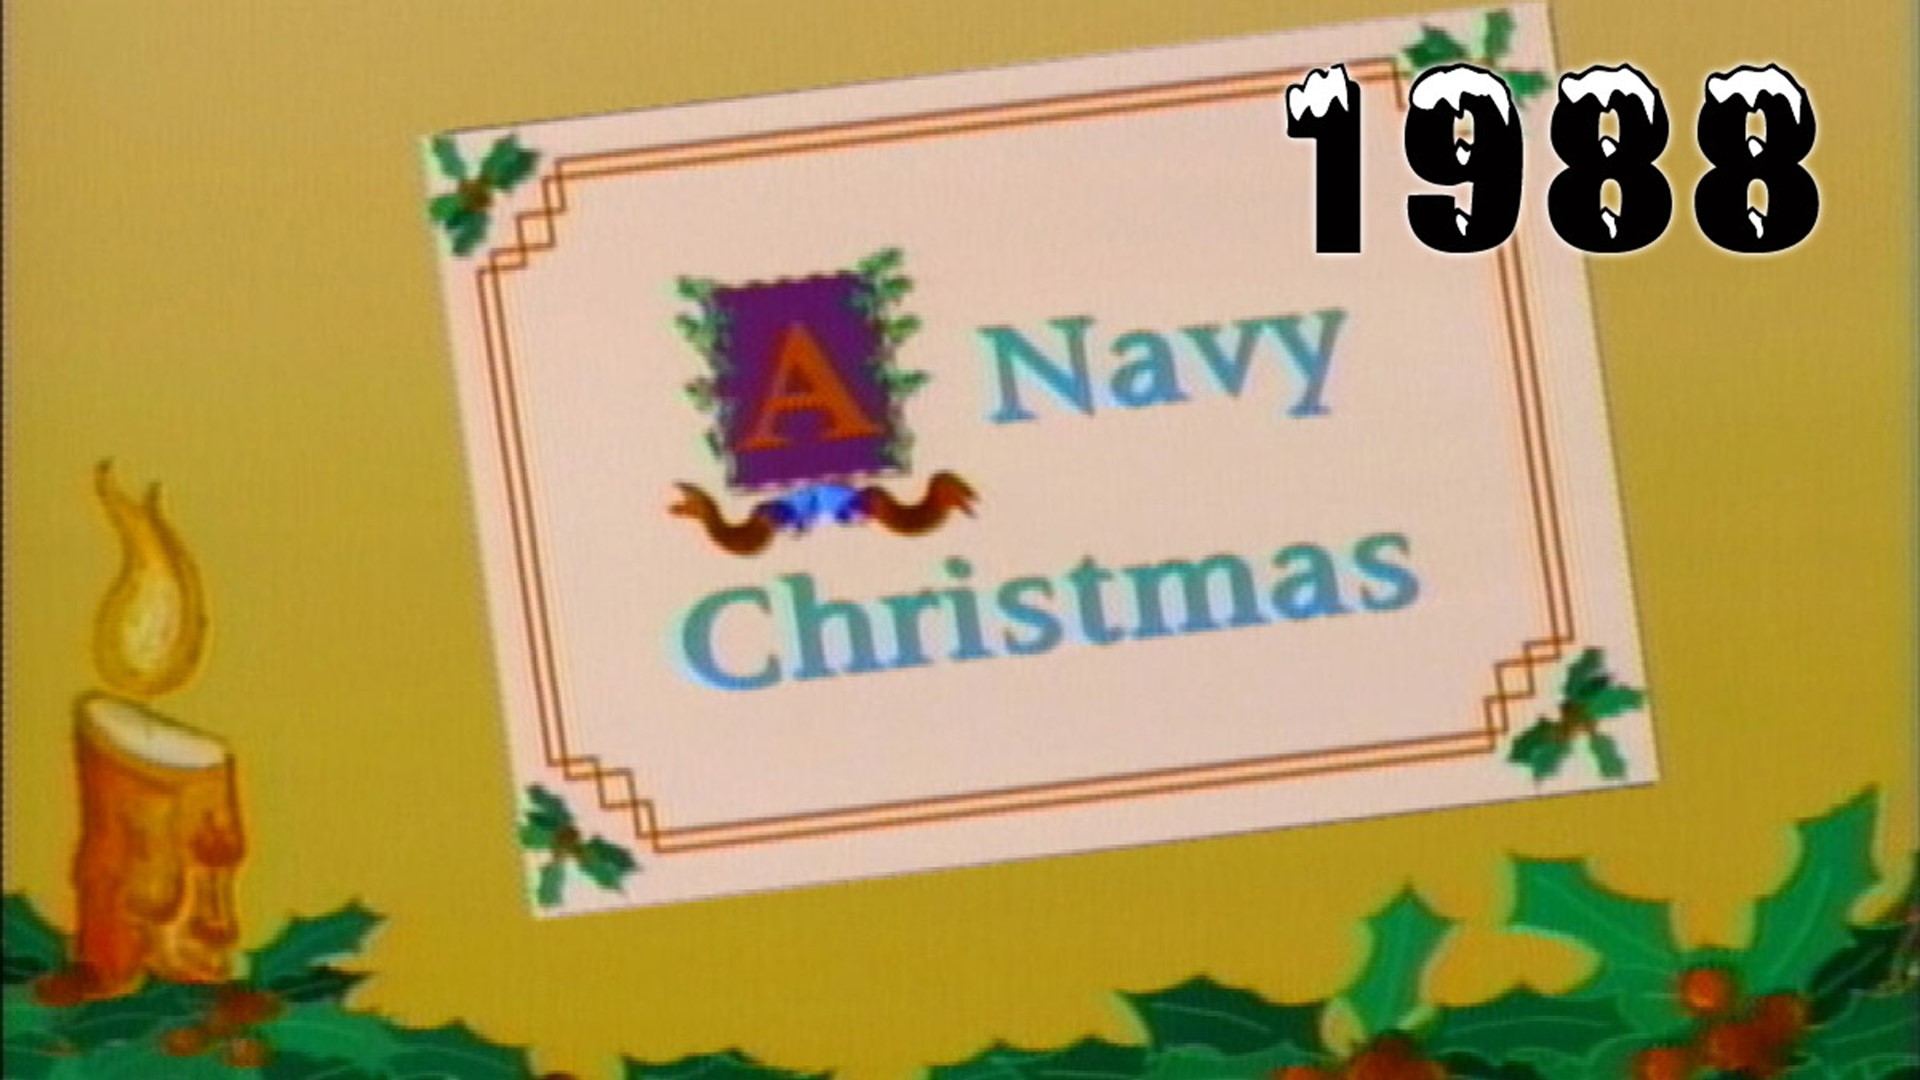 For more than 35 years, 13News Now has honored our military men and women with an annual holiday special. This is the 3rd annual Navy Christmas, which aired in 1988.